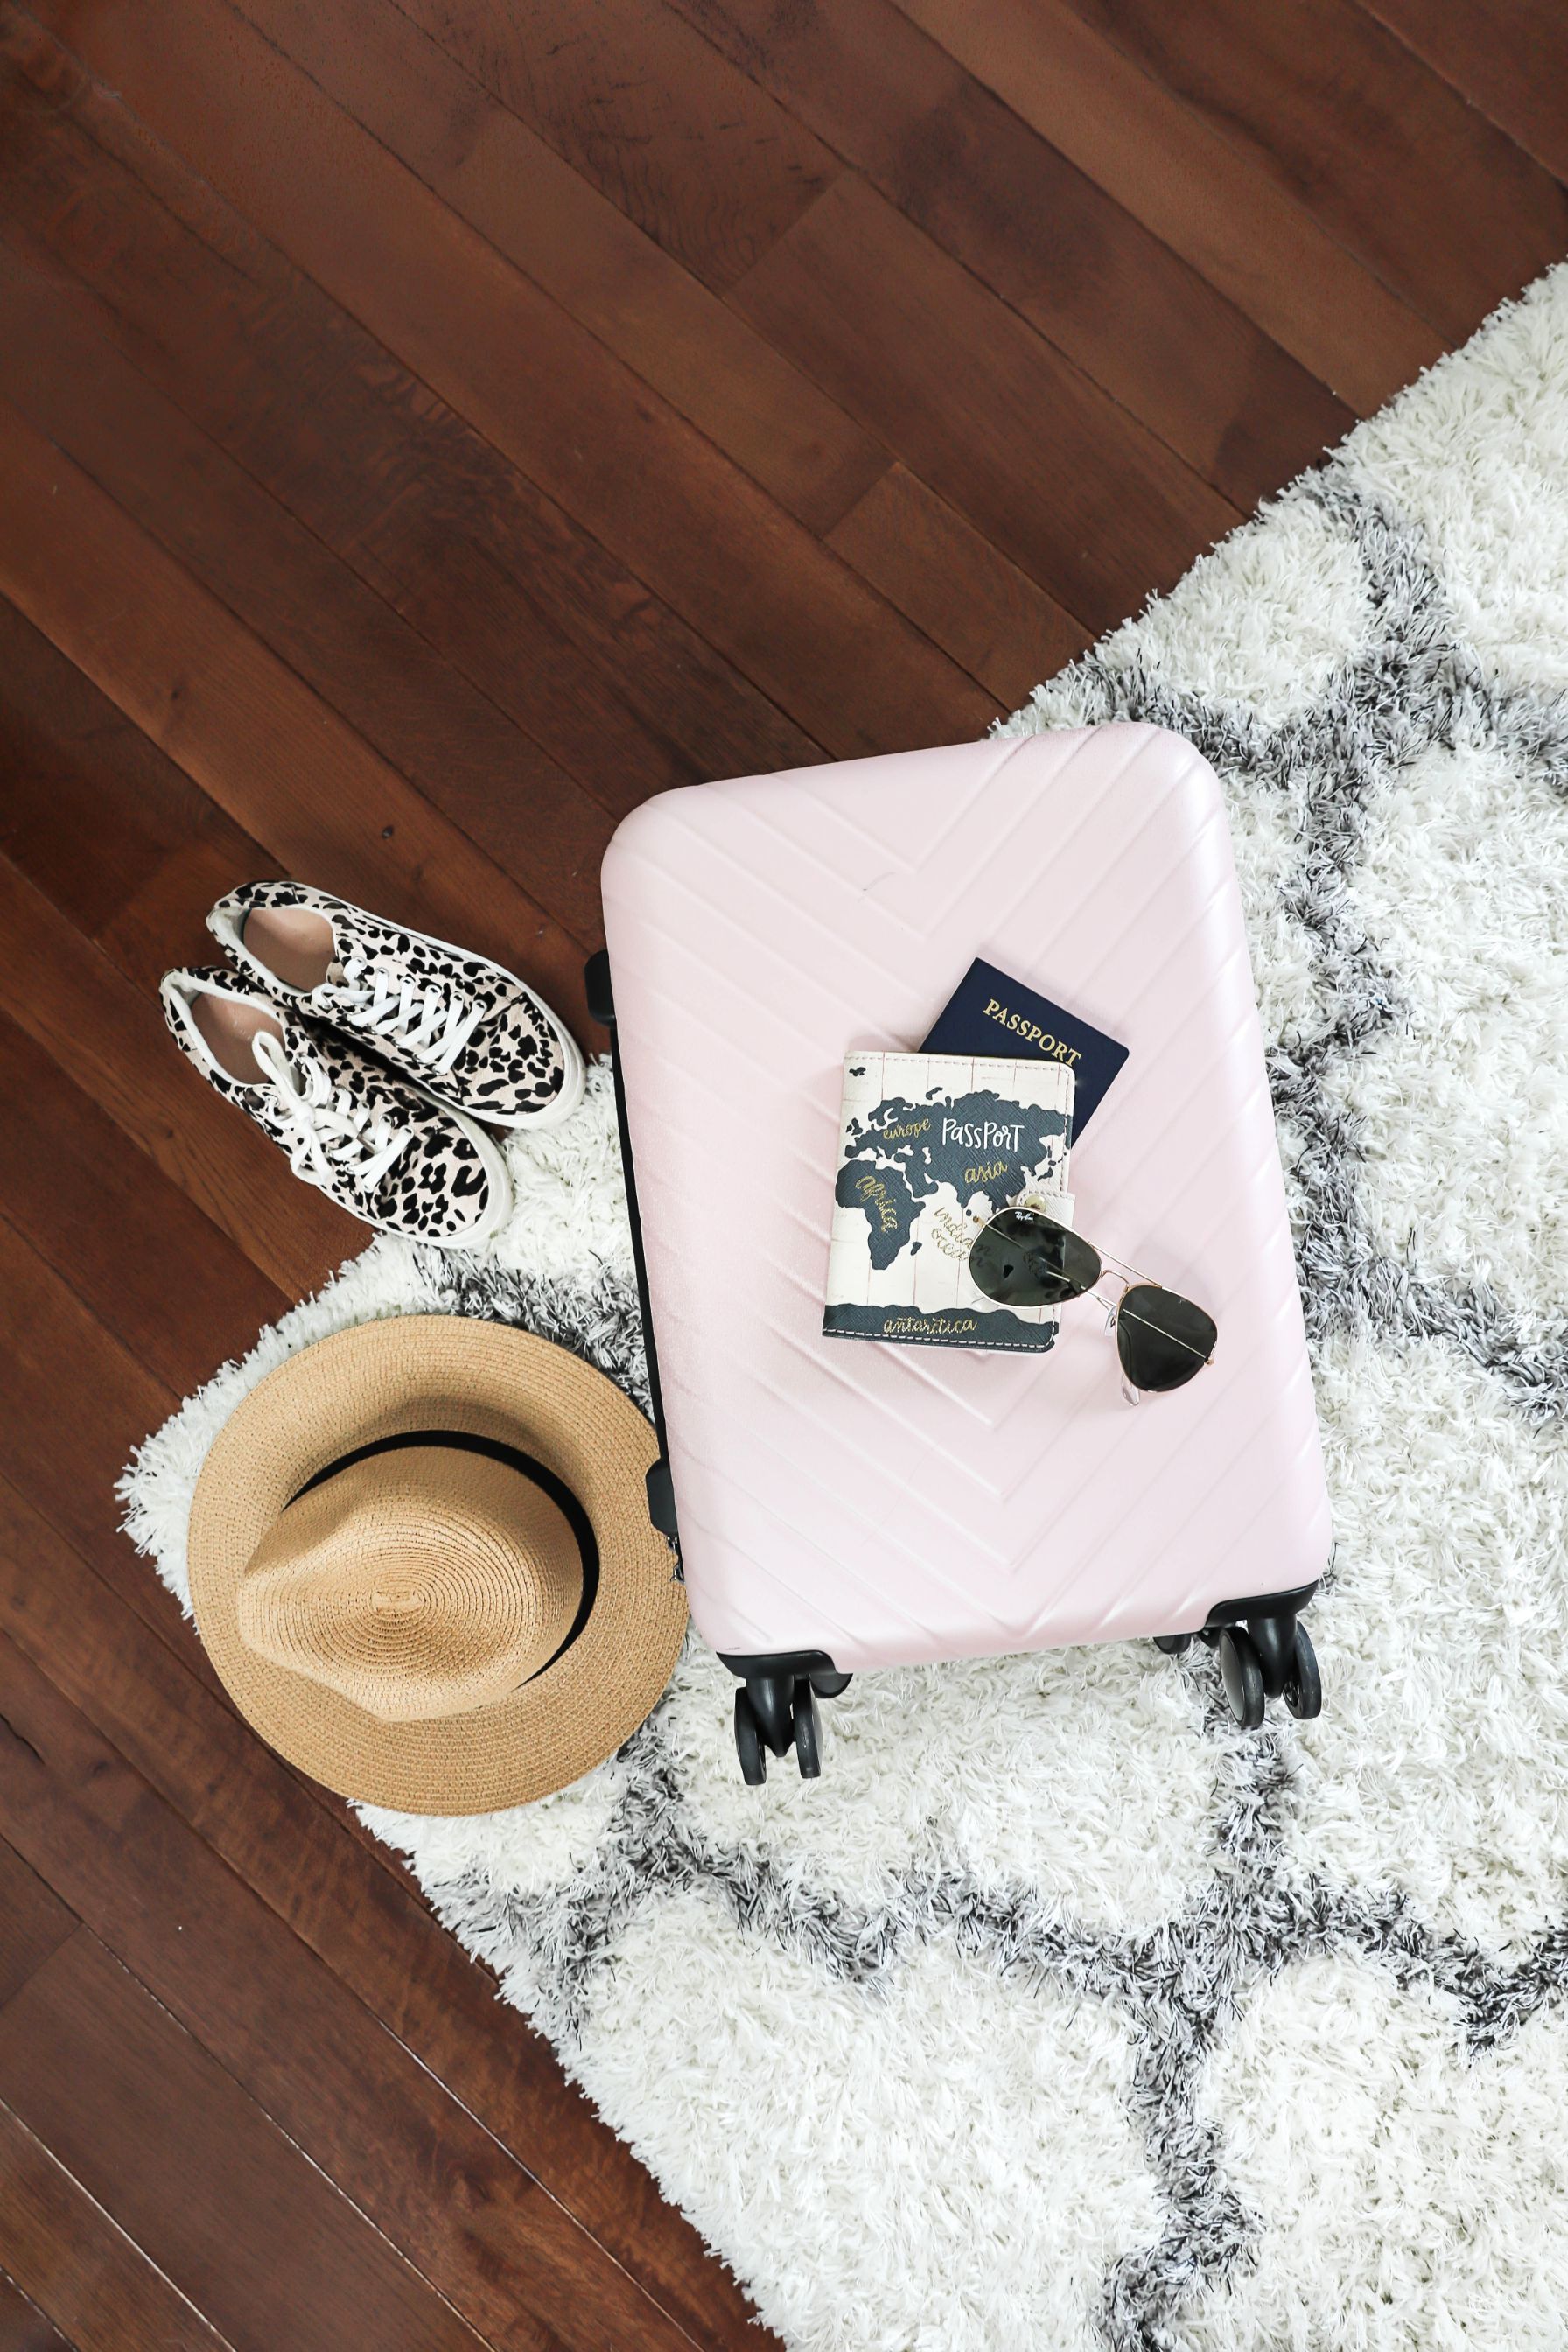 Weekend packing tips short vacation suitcase luggage lifestyle fashion blog daily dose of charm lauren lindmark 